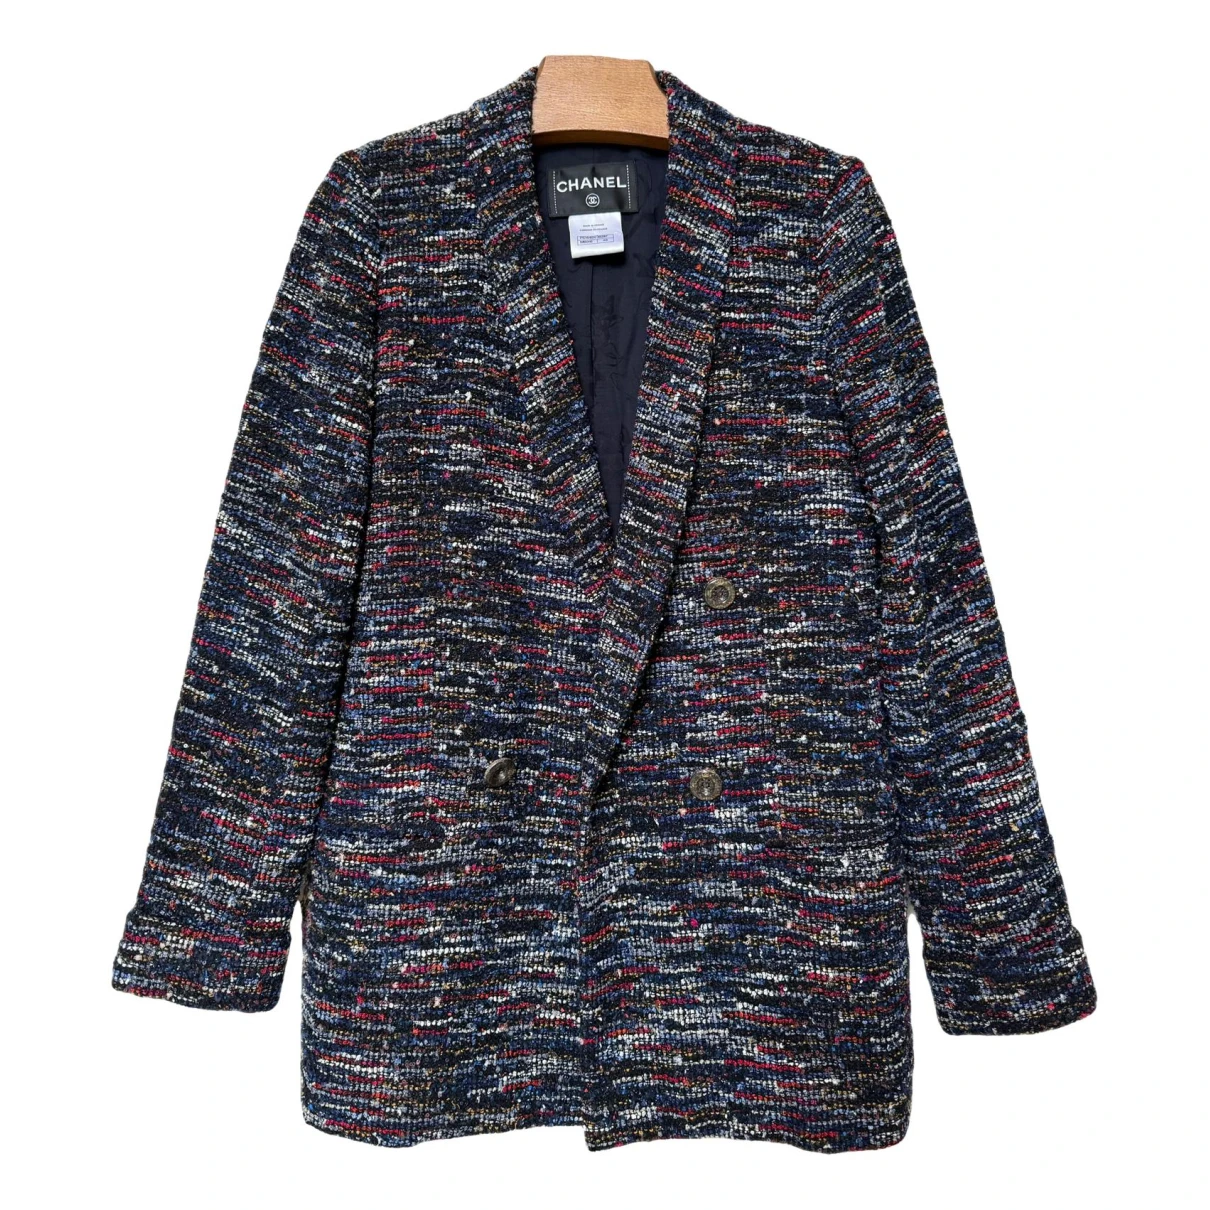 clothing Chanel jackets for Female Tweed 40 FR. Used condition